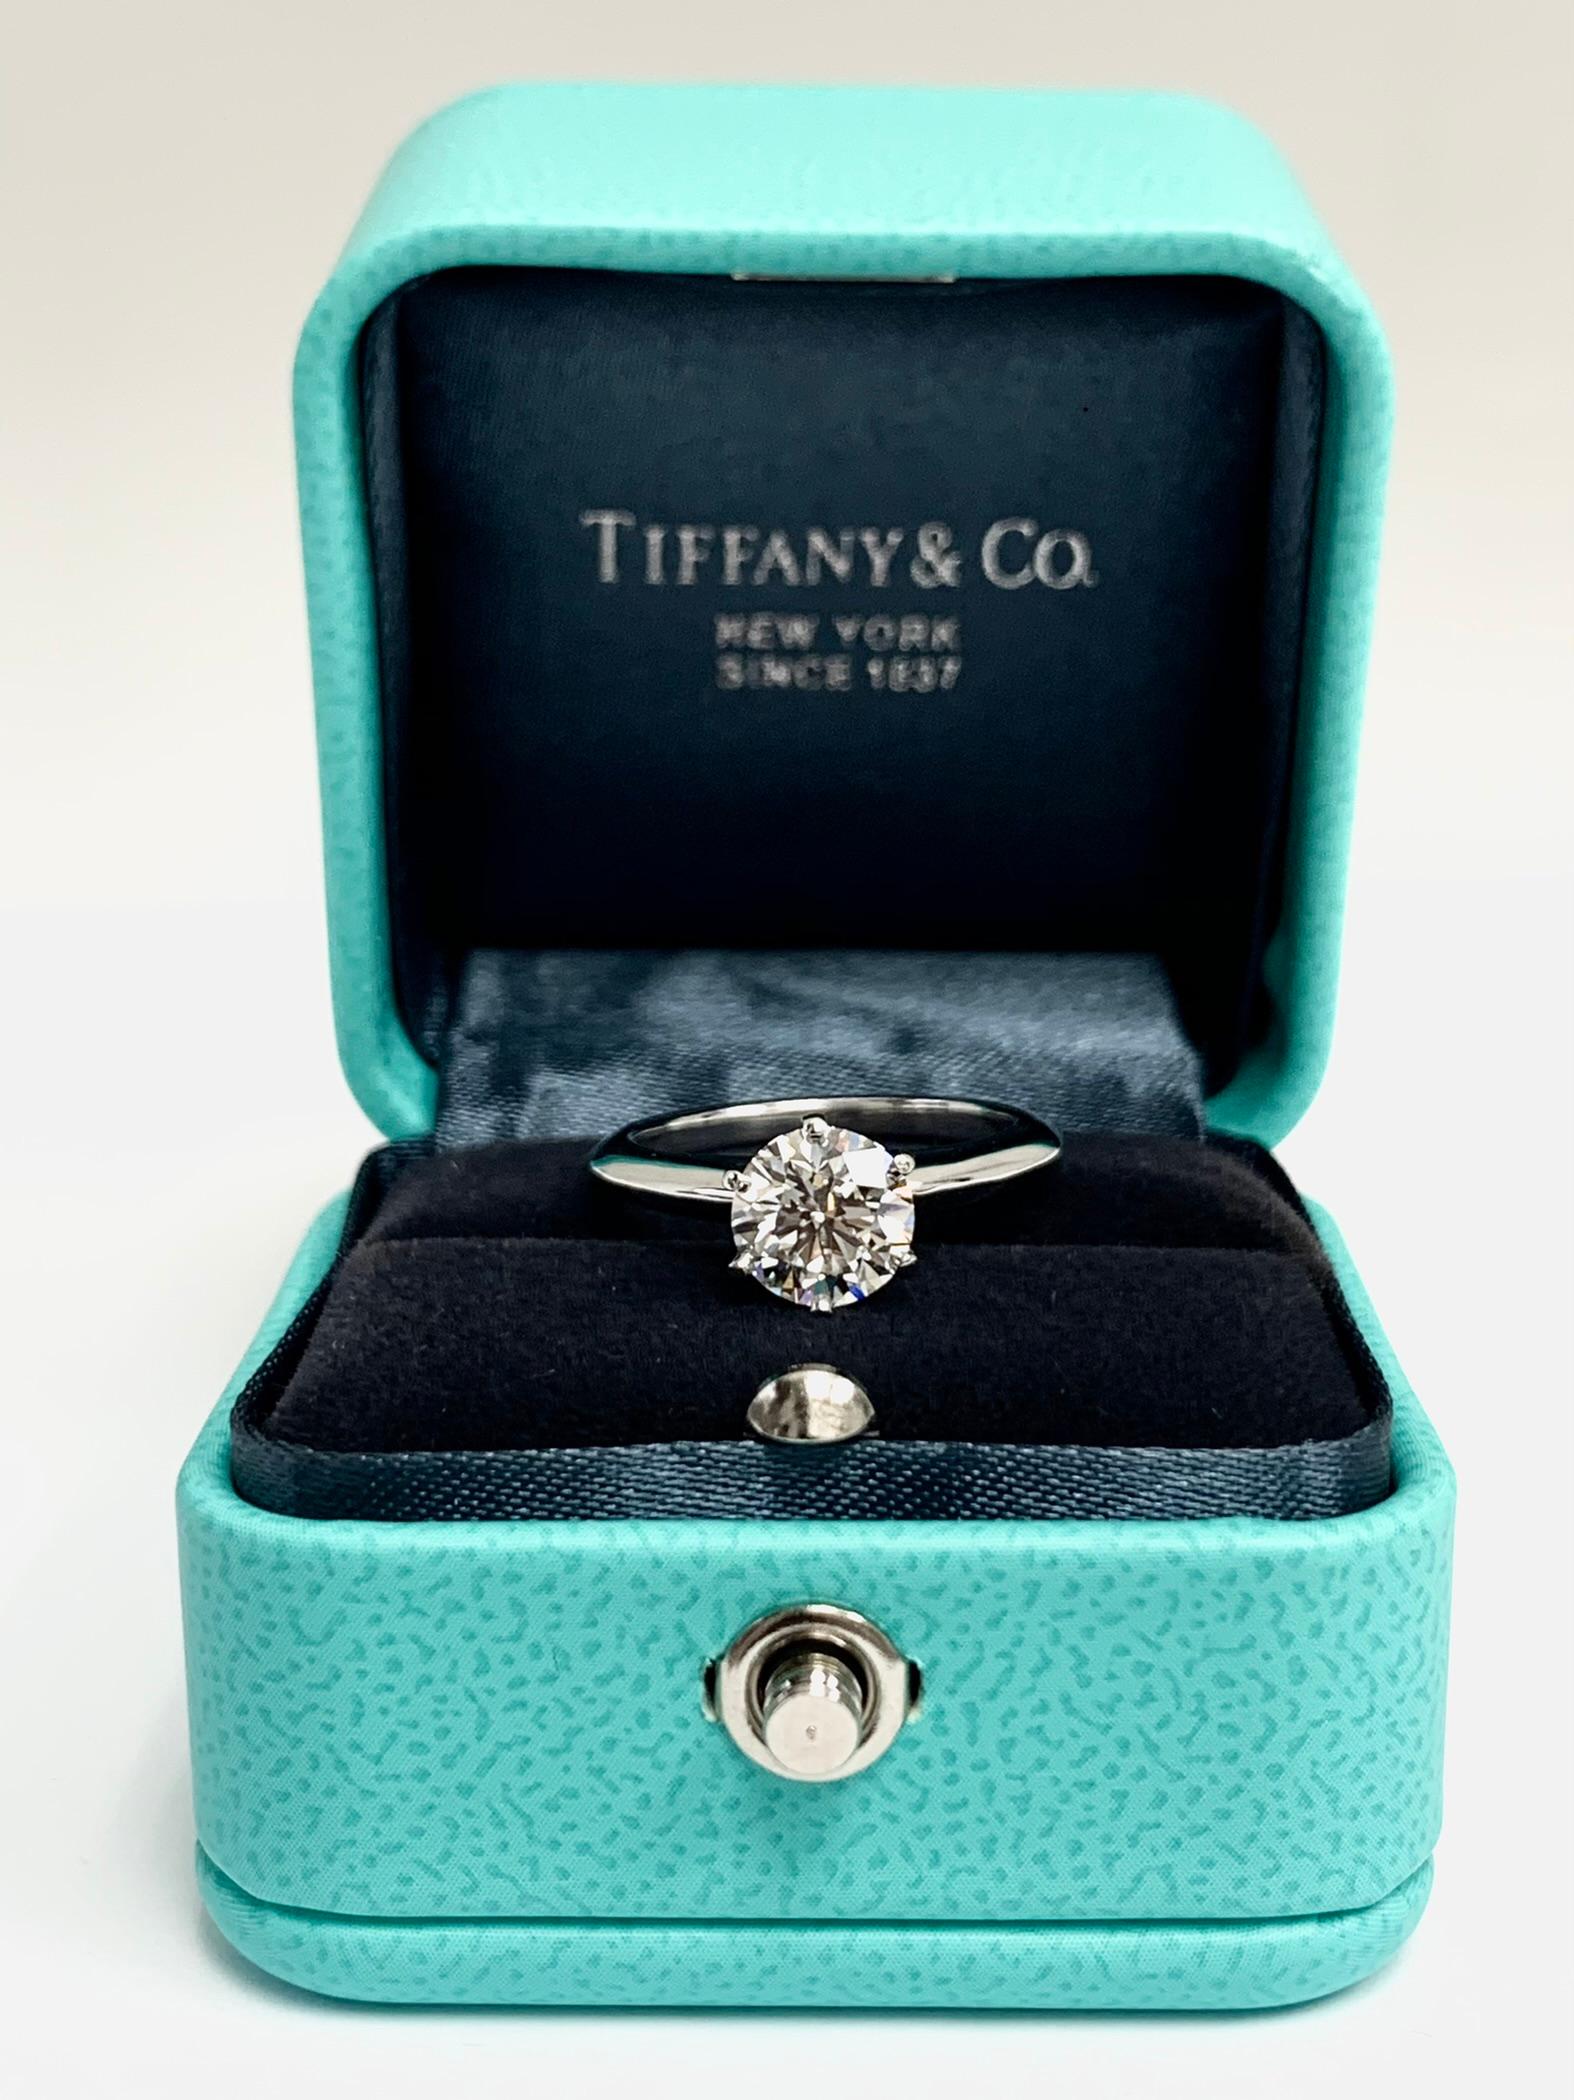 Classic Tiffany & Co Round Brilliant cut diamond set as a Solitaire Engagement Ring featuring a 1.39 ct Center graded
with a G color and Internally Flawless (IF) clarity grade, Triple Excellent Cut. Finely crafted in a 6 prong Platinum Mounting.
(